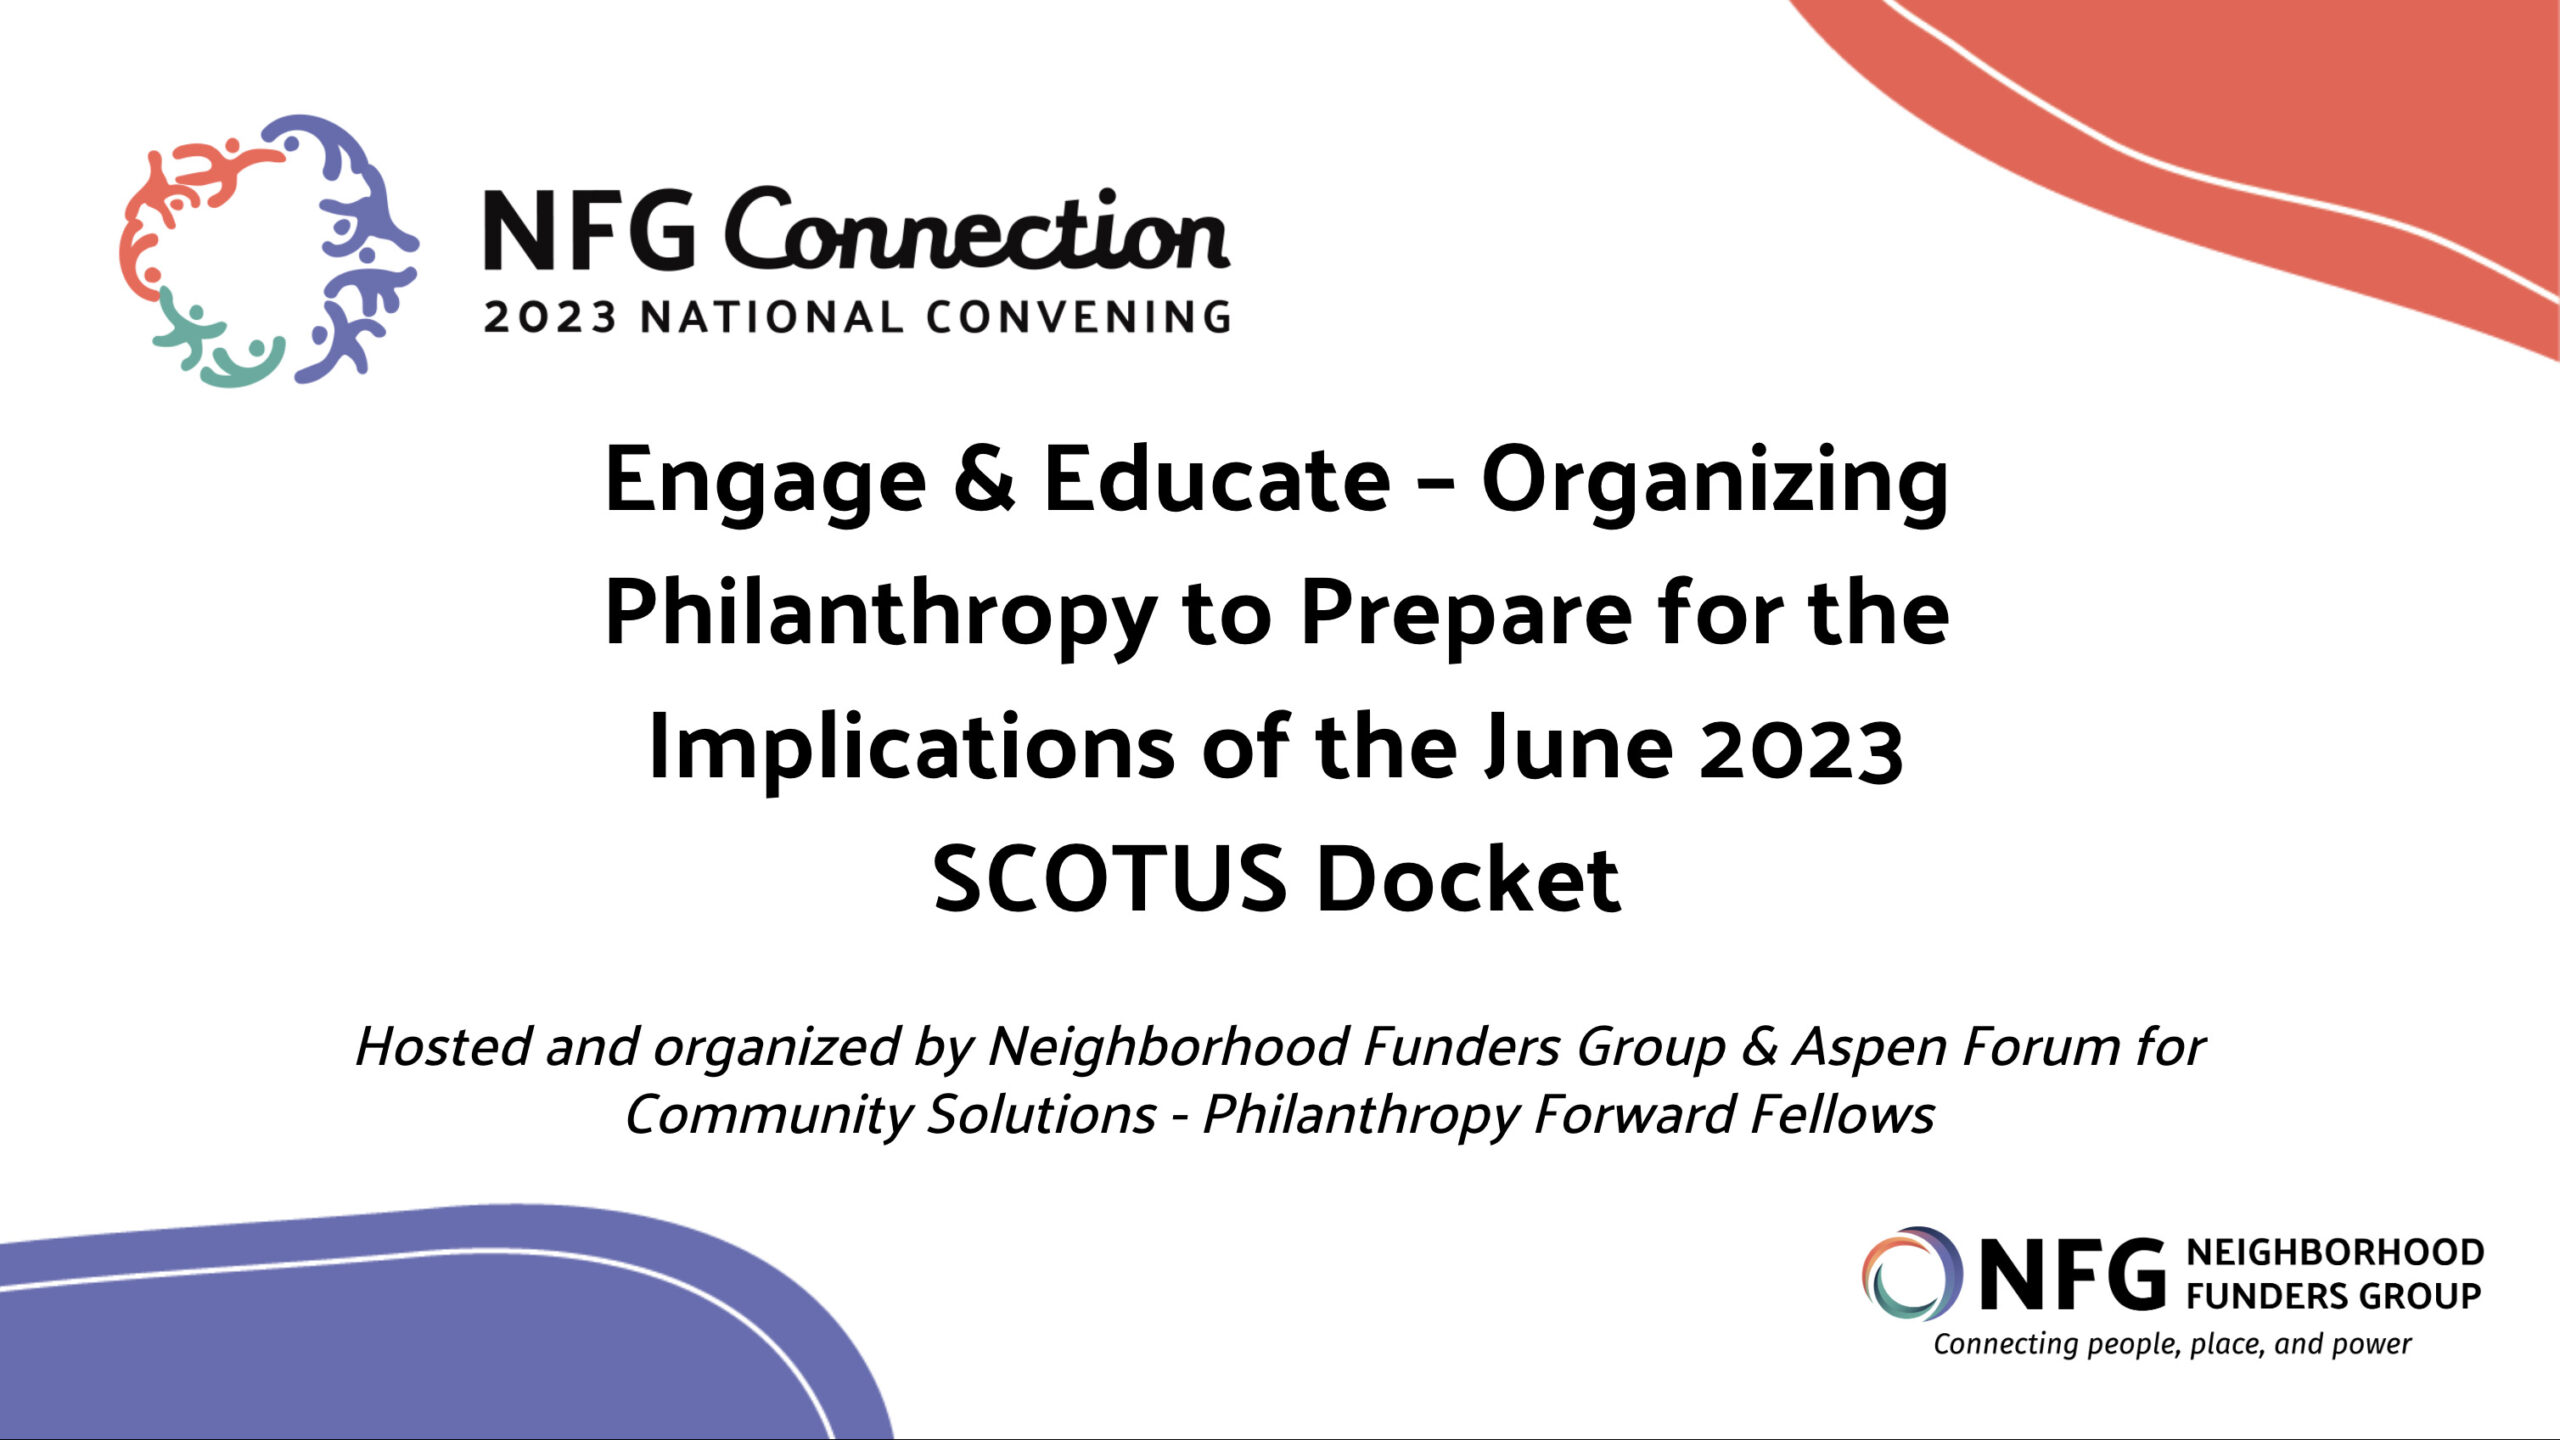 Title card for NFG's 2023 National Convening session: "Engage & Educate – Organizing Philanthropy to Prepare for the Implications of the June 2023 SCOTUS Docket" Hosted and organized by Neighborhood Funders Group & Aspen Forum for Community Solutions - Philanthropy Forward Fellows